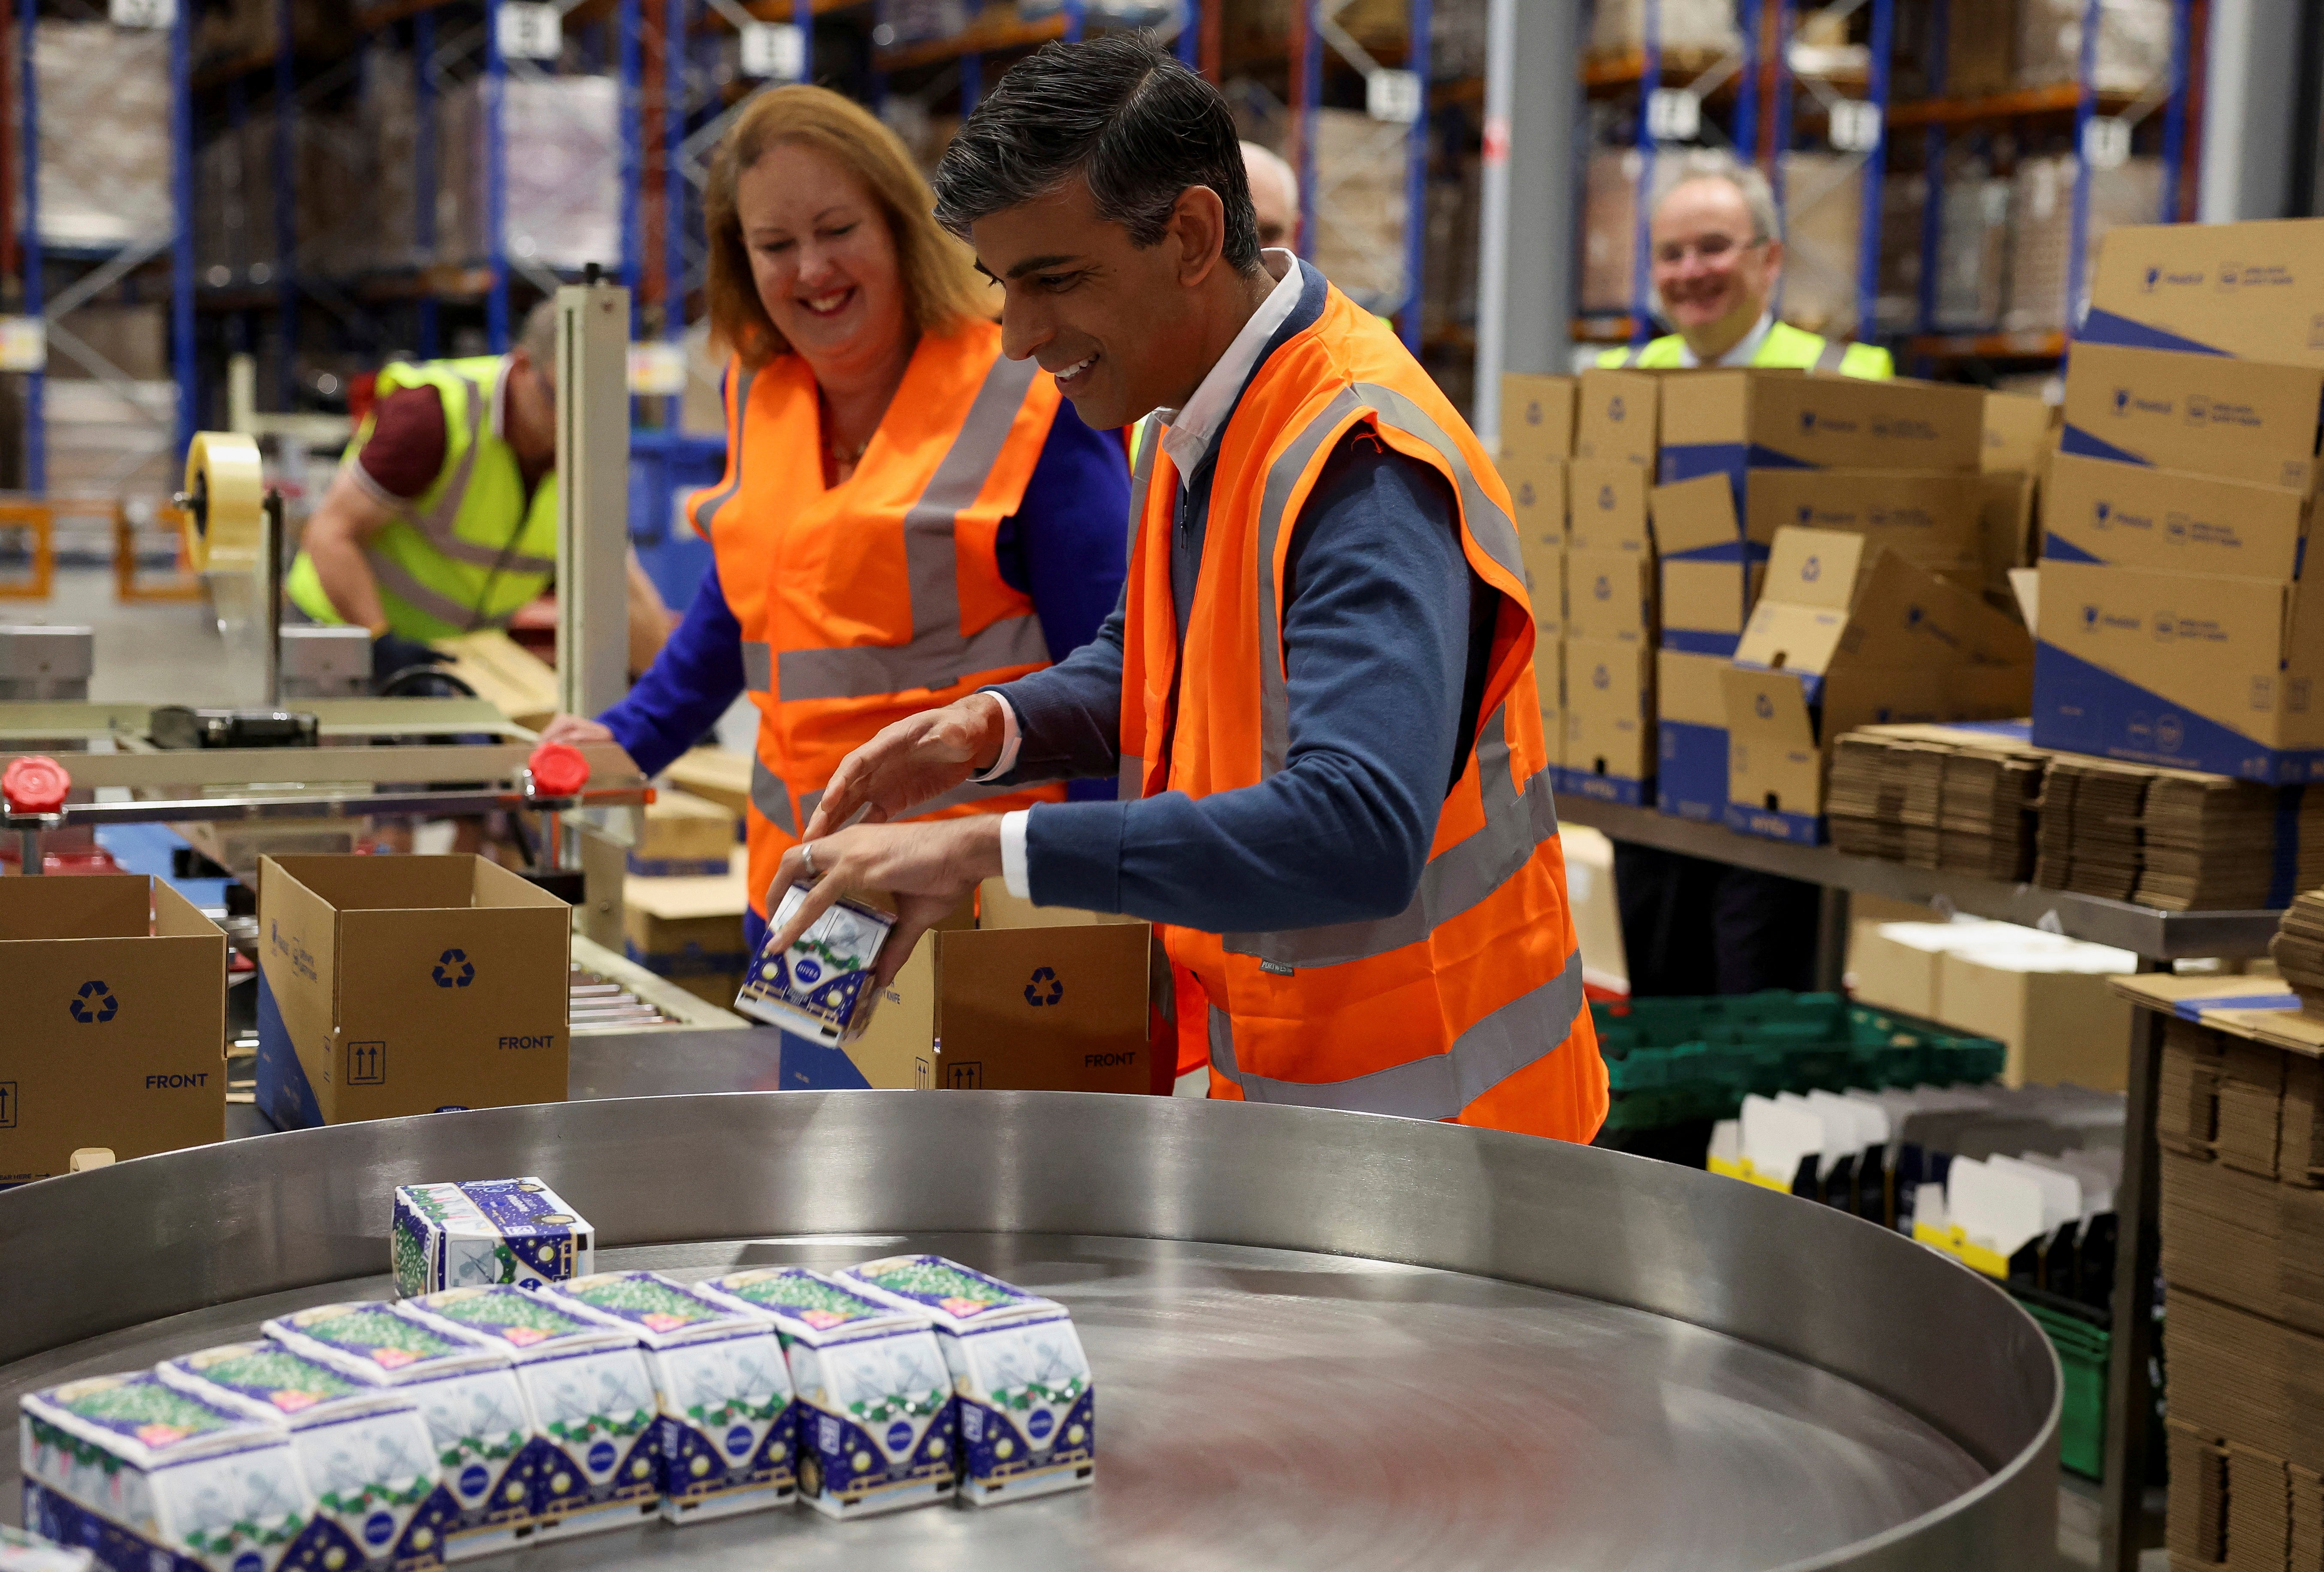 Prime Minister Rishi Sunak helps in packing boxes of Christmas skin care gift sets alongside Conservative Party Candidate for Banbury Victoria Prentis